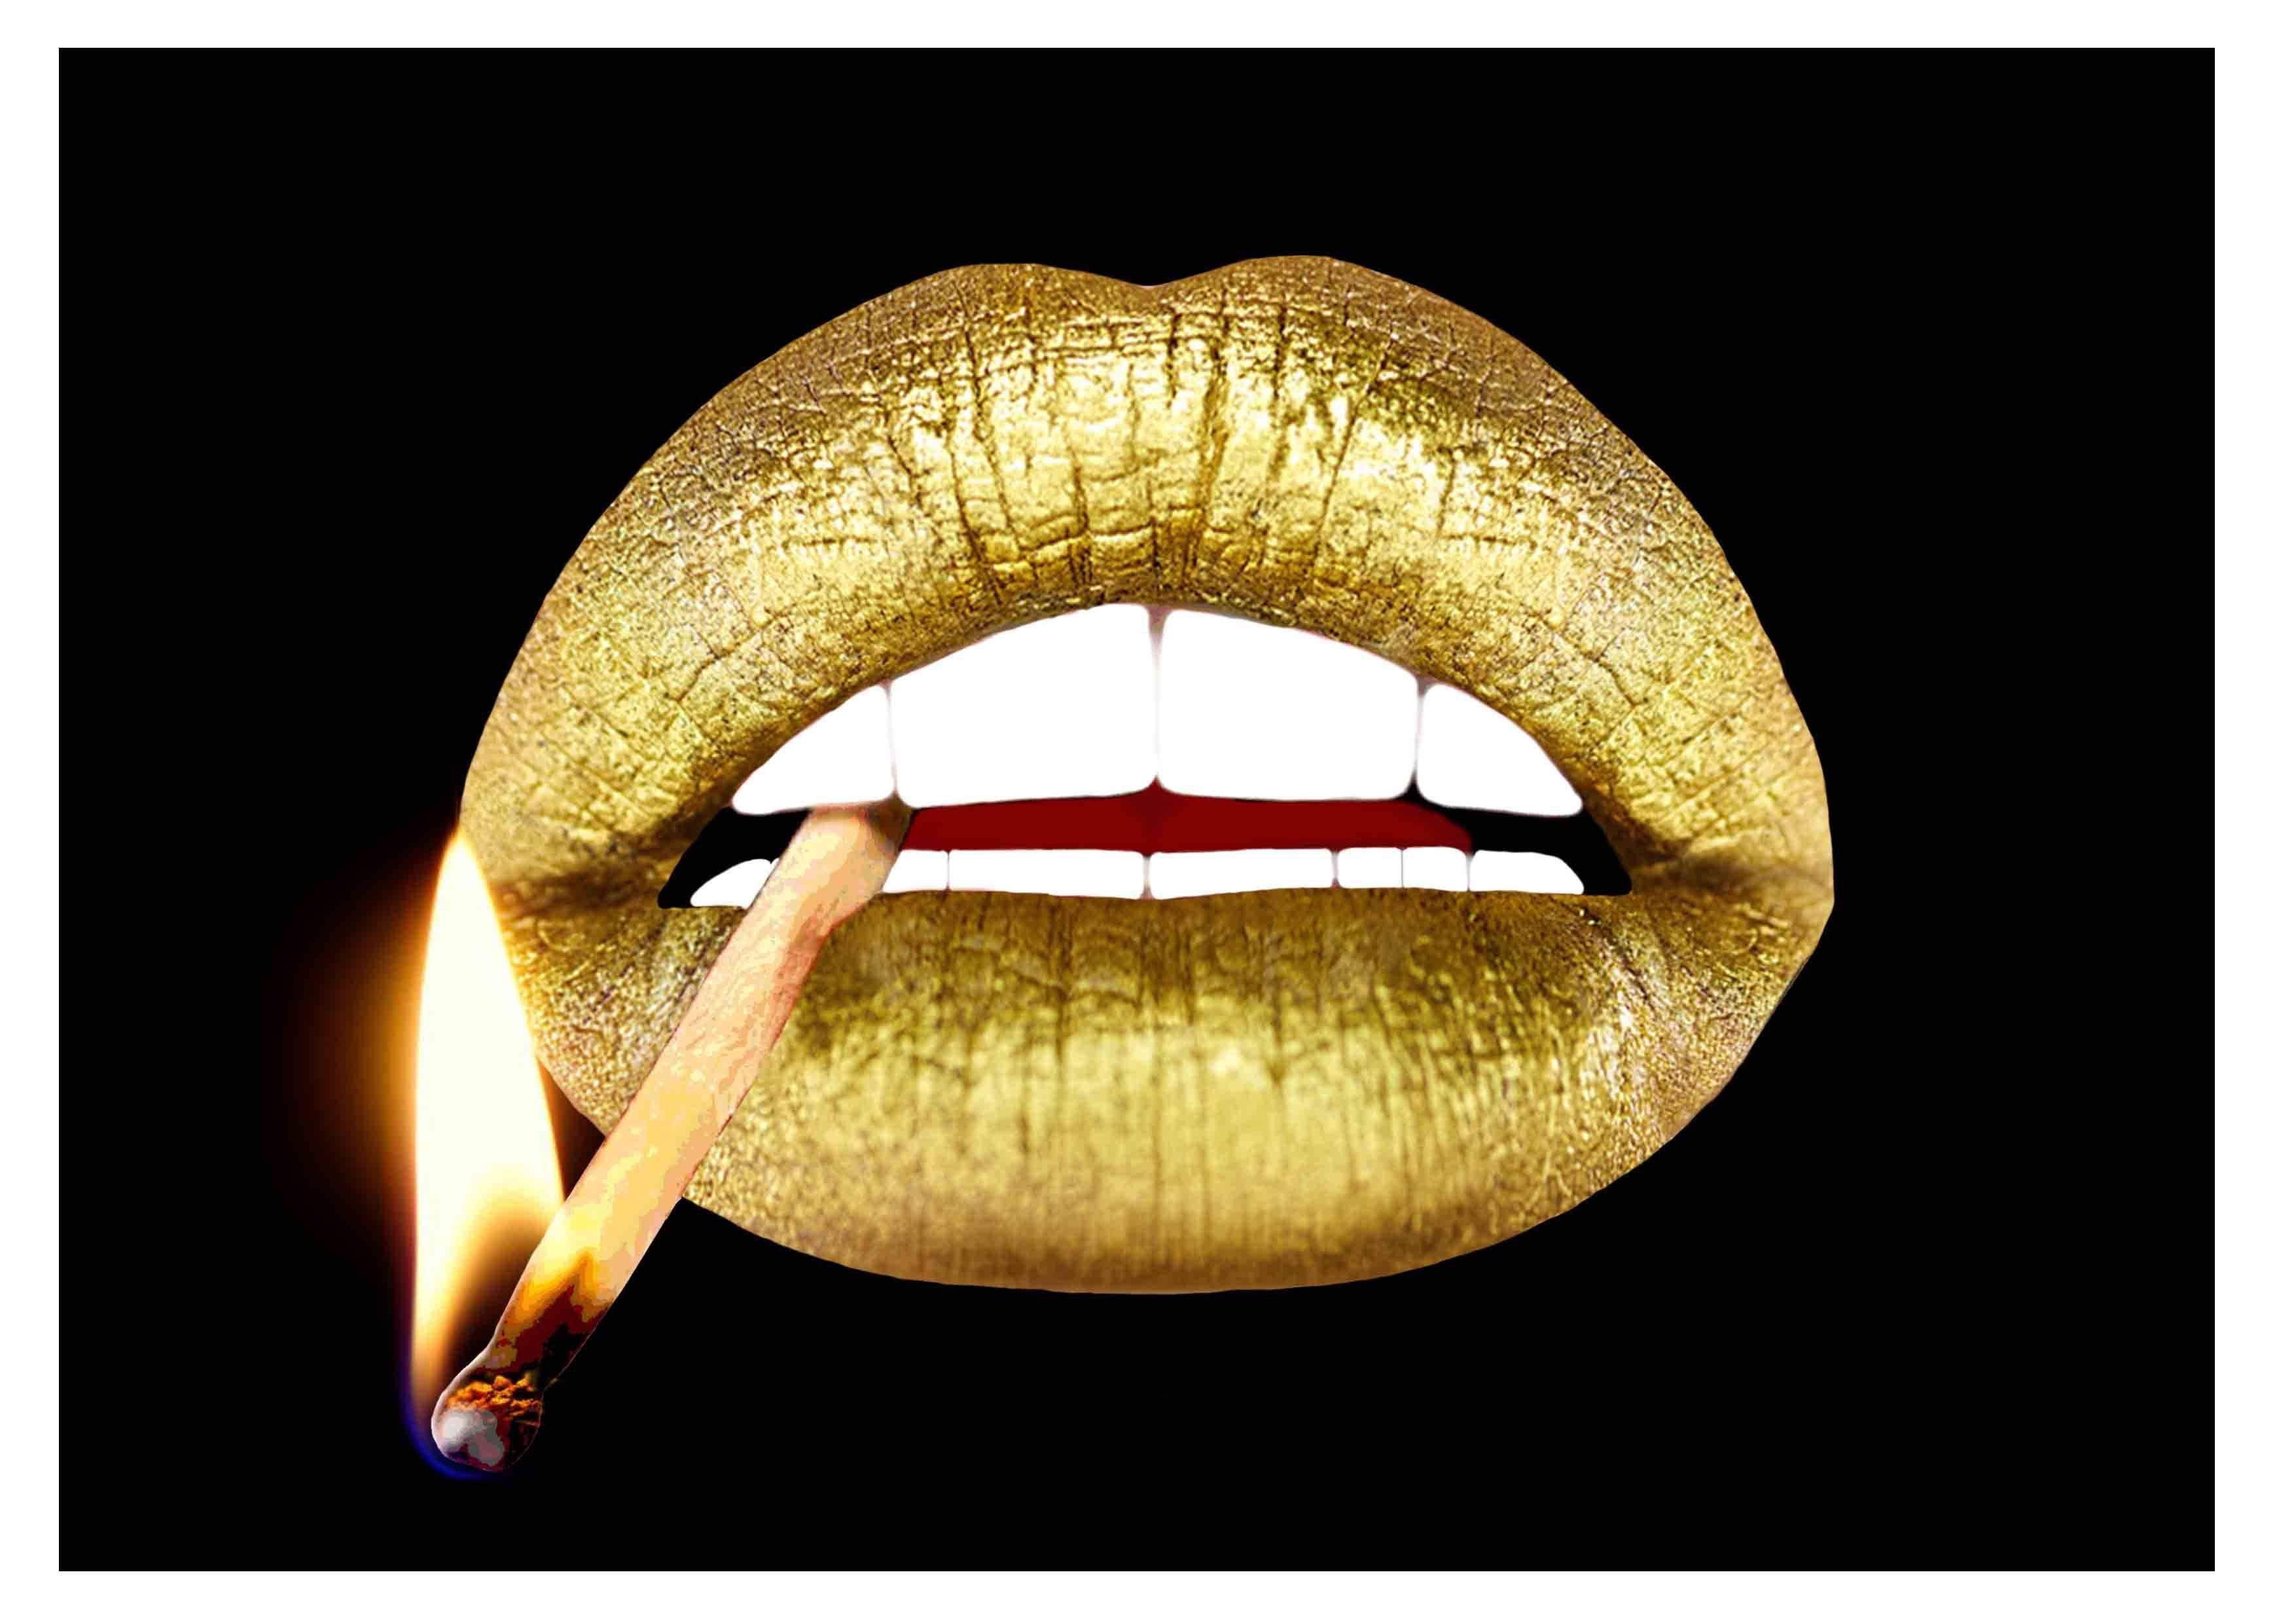 Stephen Potter Figurative Print - Gold Lips Figurative print. Mixed MediaLimited Edition of 10. Personally signed.